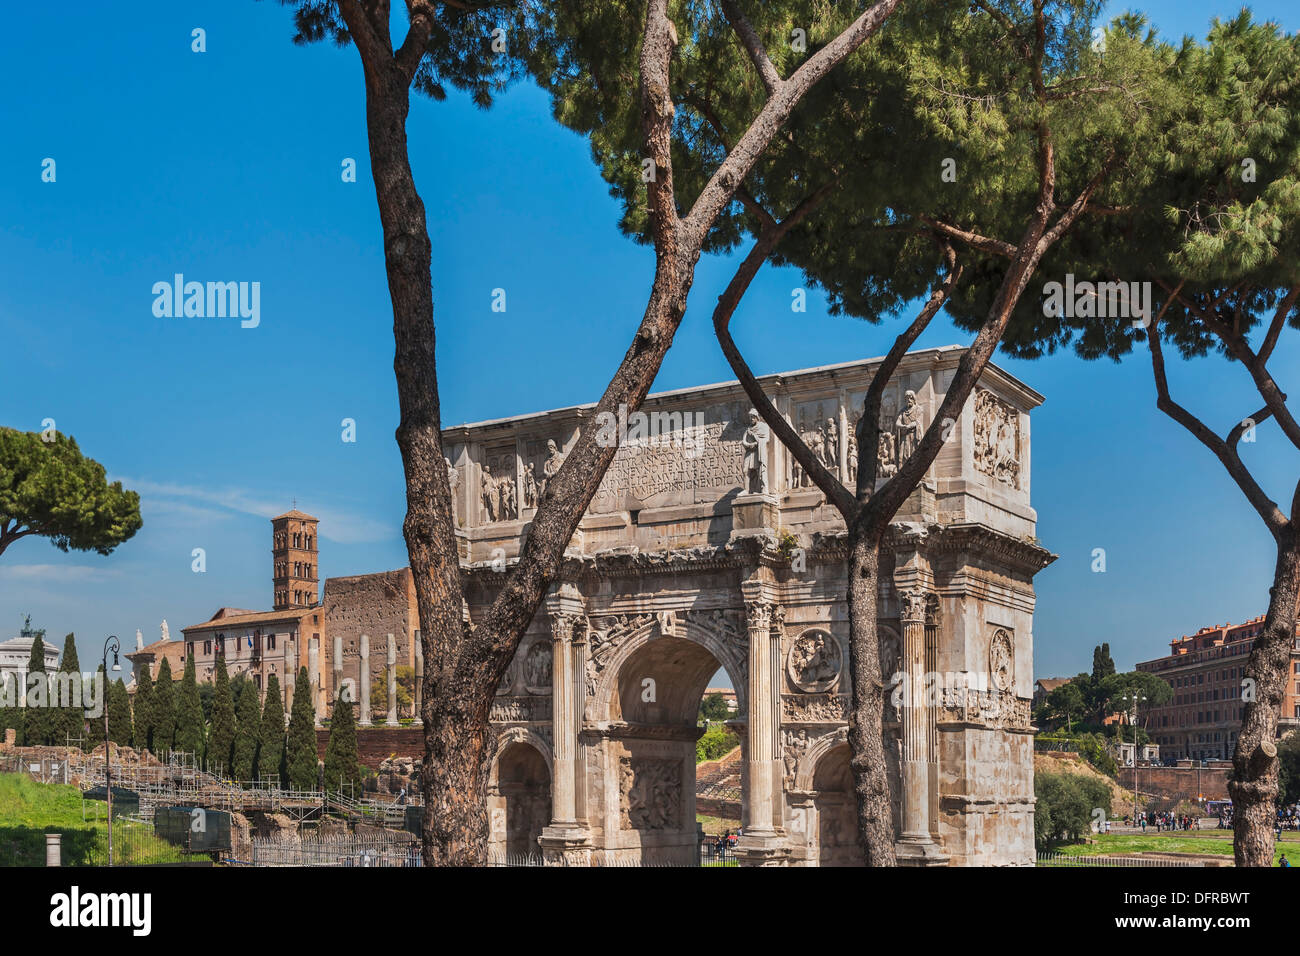 The Arch of Constantine (Arco di Costantino) is located in front of the Colosseum, Rome, Lazio, Italy, Europe Stock Photo